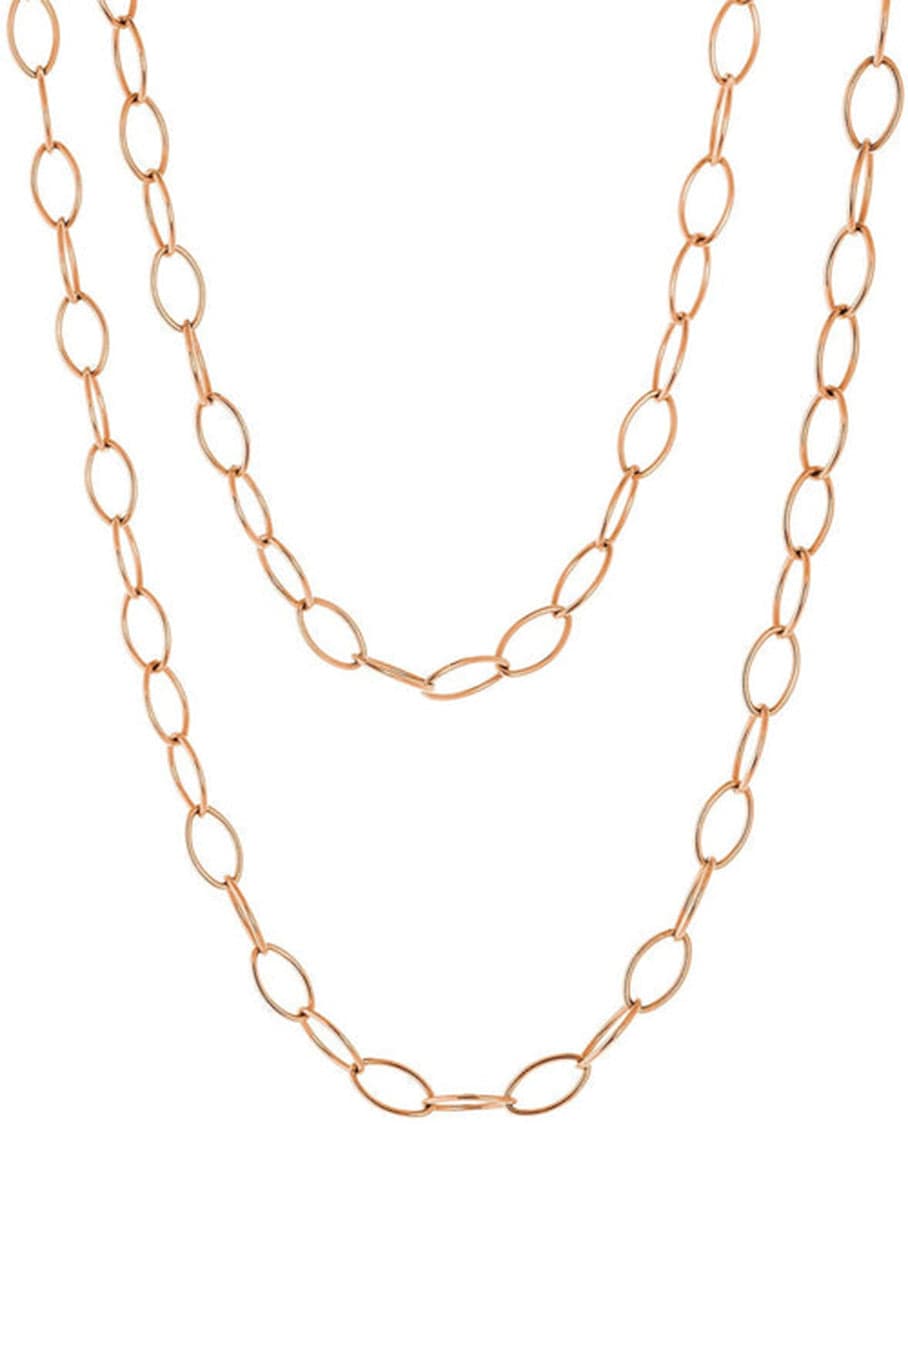 DEVON WOODHILL-Large Oval Link Chain - 30"-ROSE GOLD